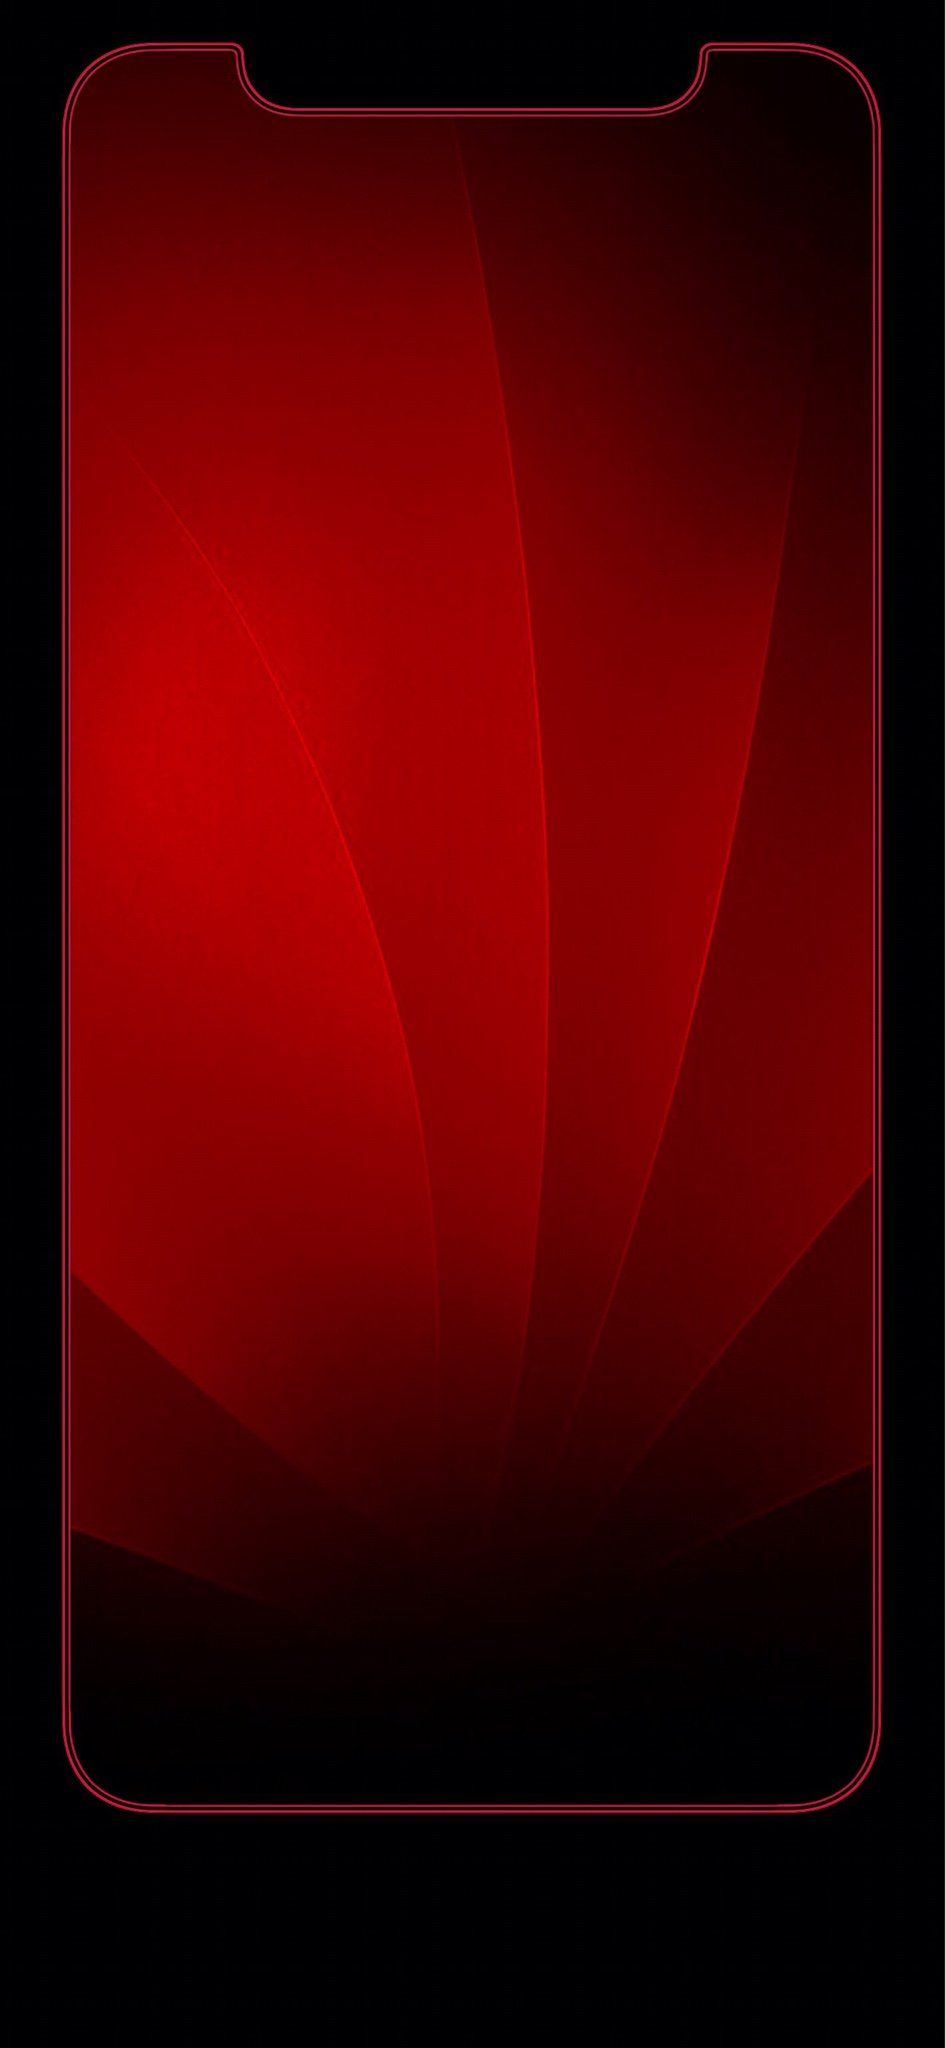 294504 Paint Color Acrylic Paint Red Painting Apple iPhone XR wallpaper  free download 828x1792  Rare Gallery HD Wallpapers